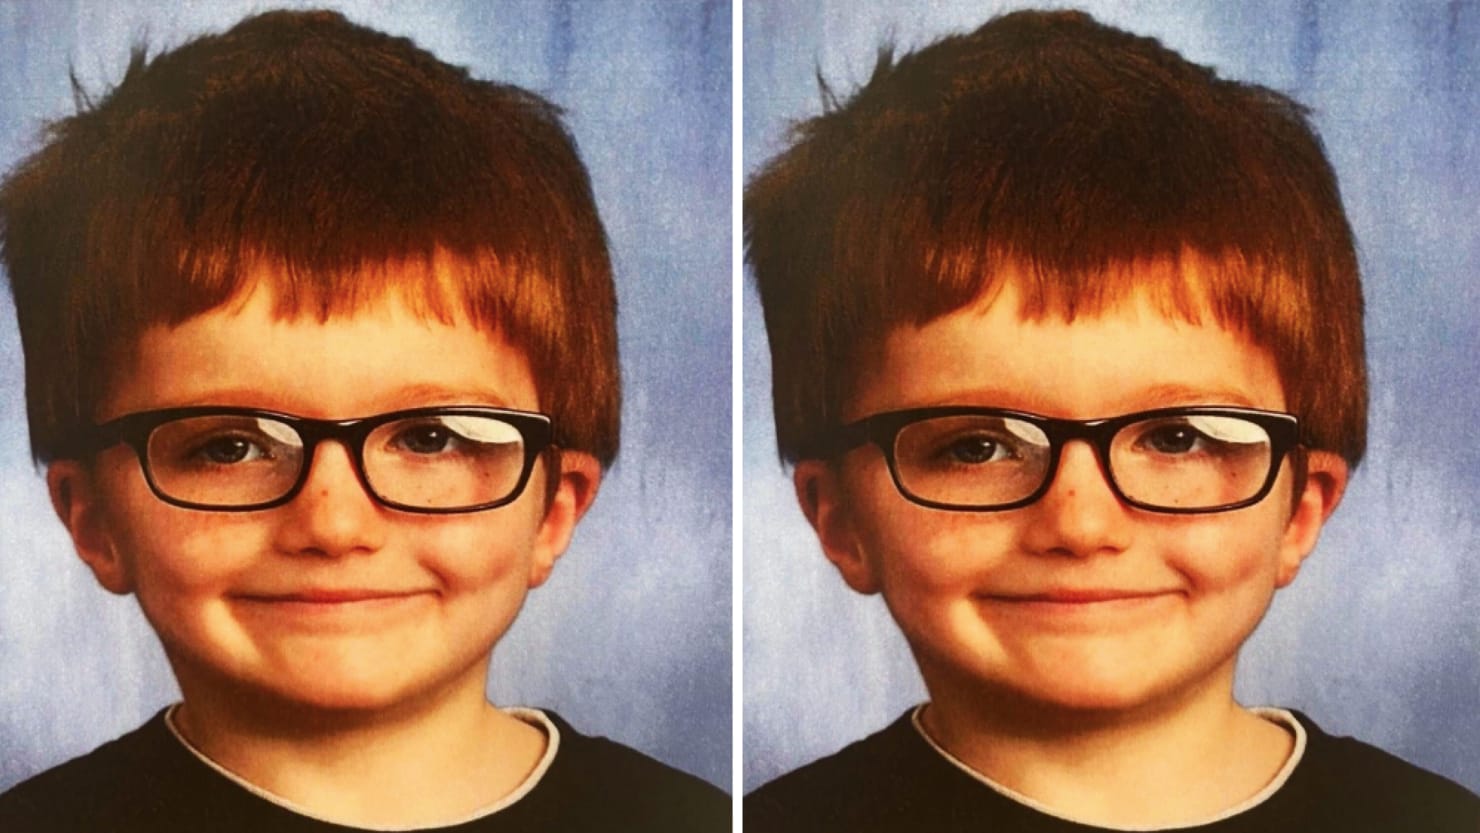 Ohio 6-year-old James Gosney died after clinging to car when mom Britney Gosney abandoned him, police say